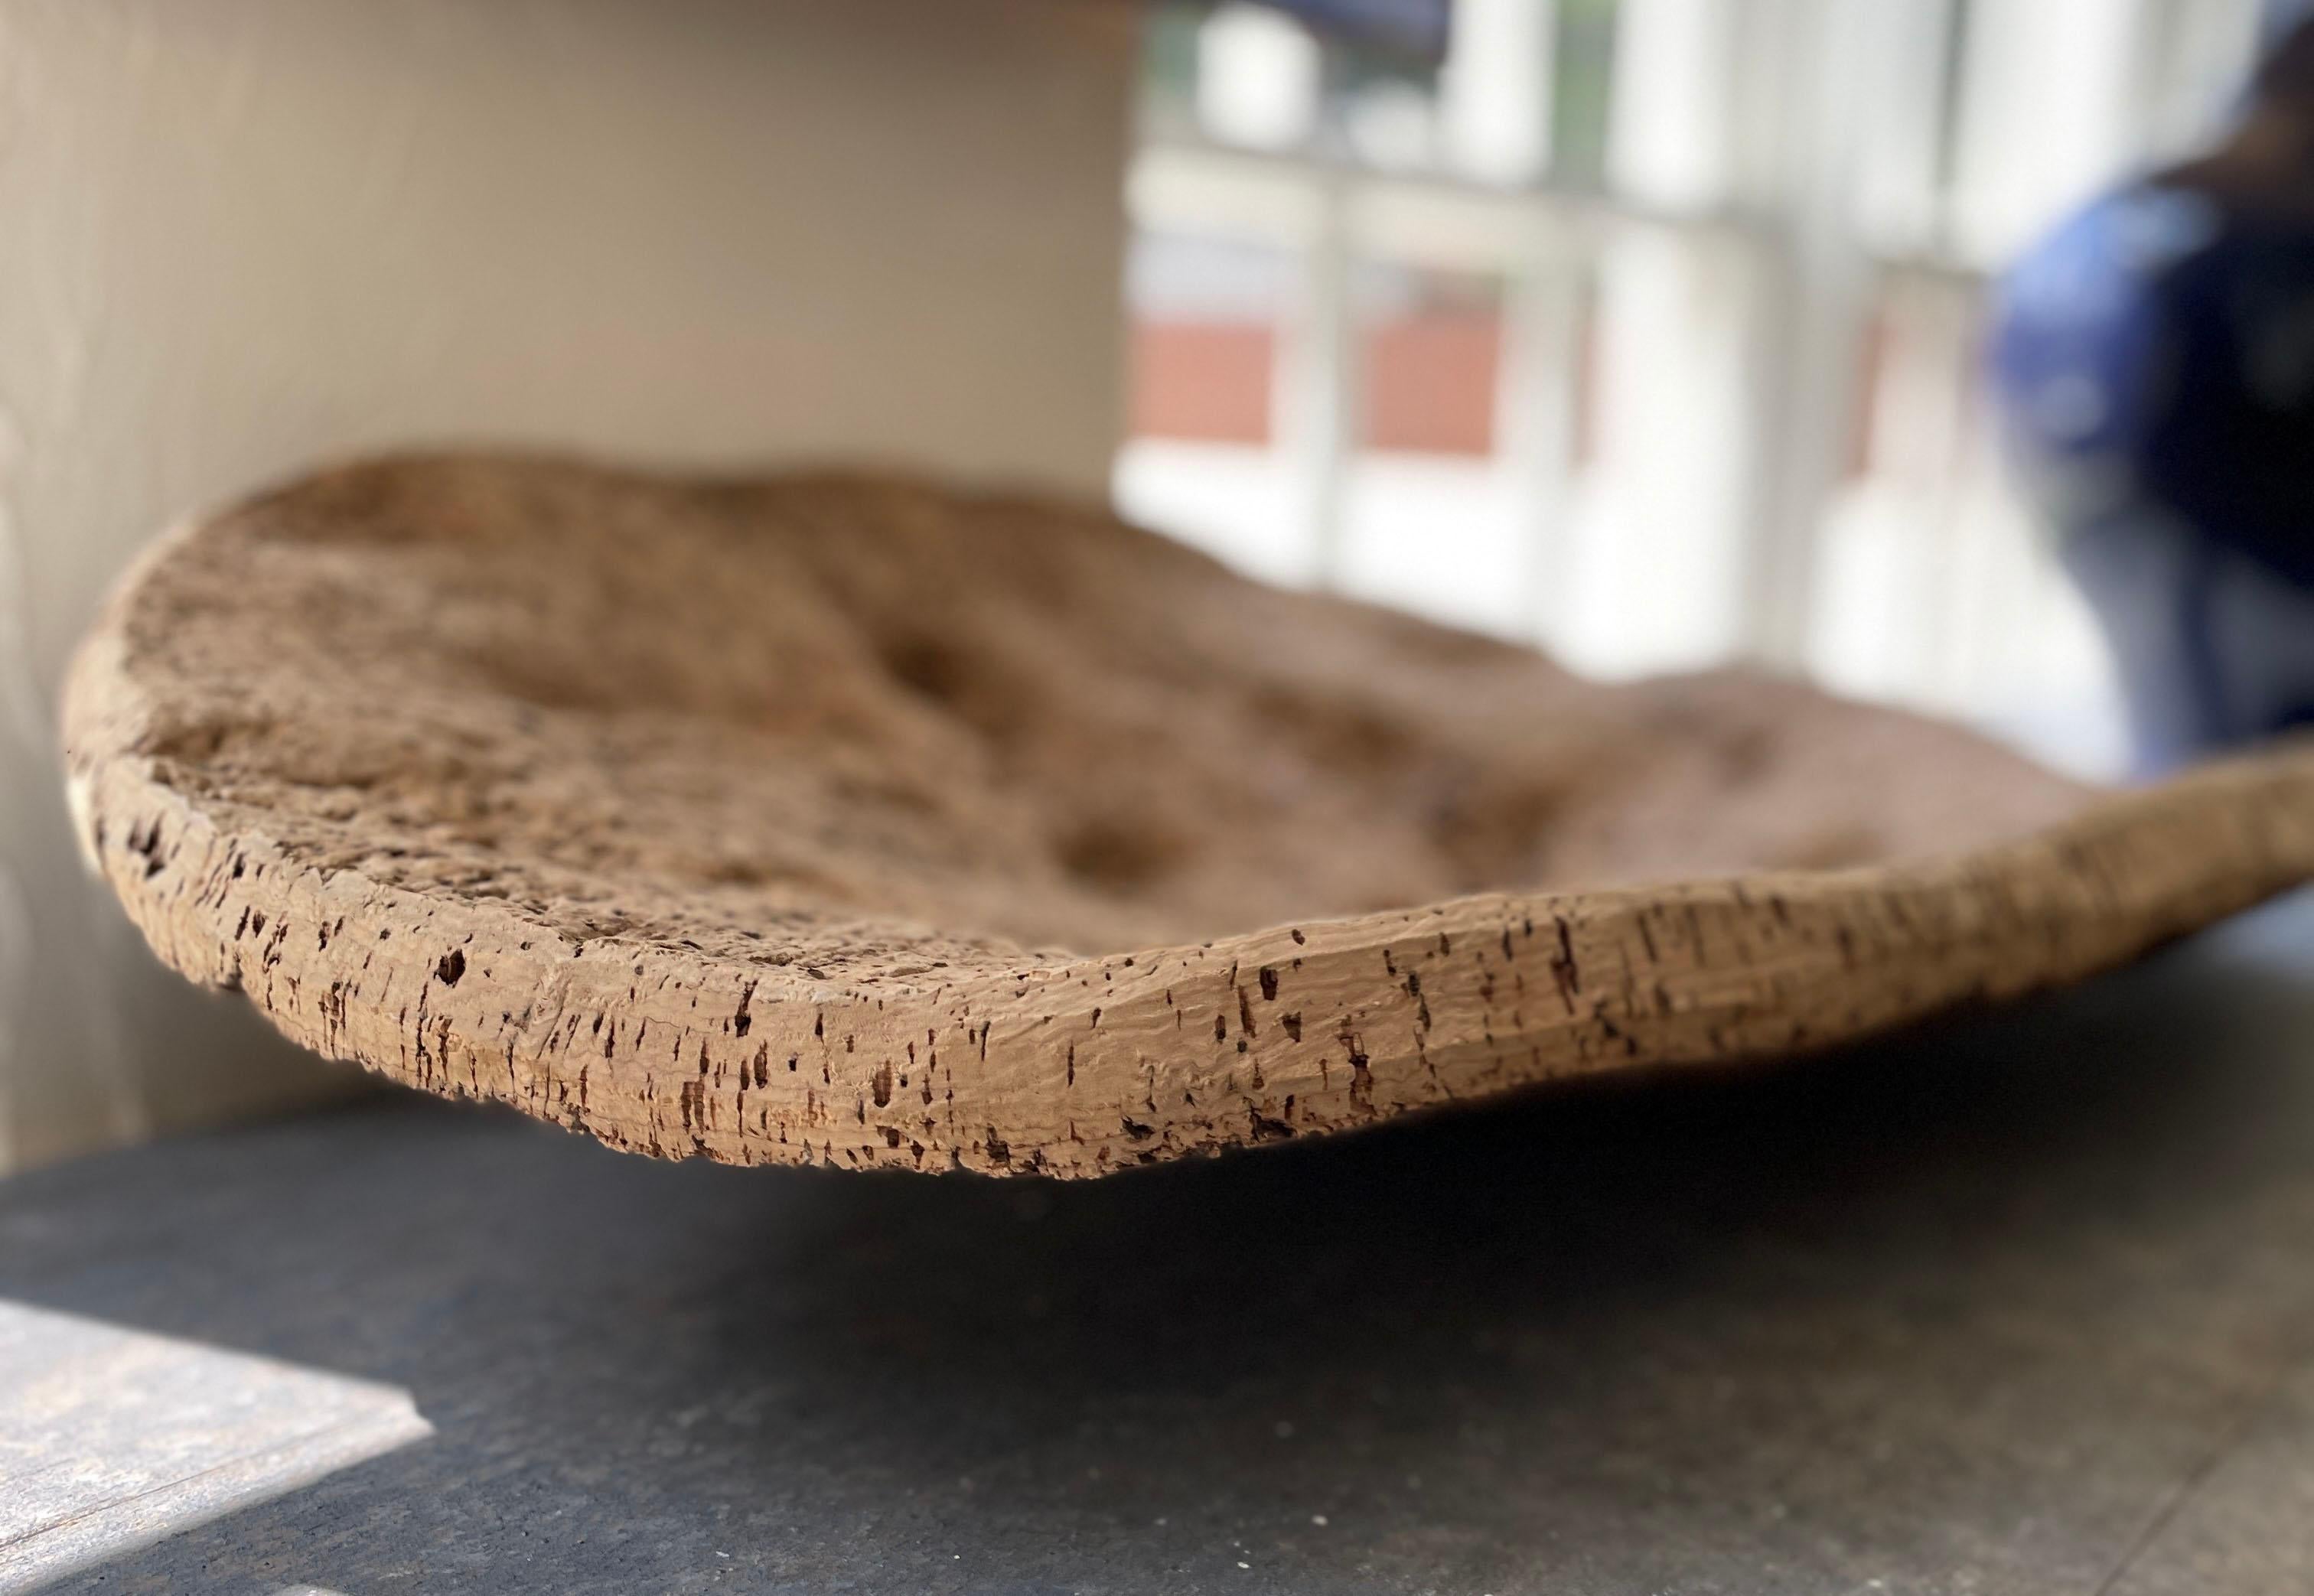 Beautiful oval shaped French cork bowl or tray. The cork is mid-century and works beautifully as a dining room table centerpiece or a coffee table item of interest. We have it filled with alabaster grapes in our store and it looks wonderful!